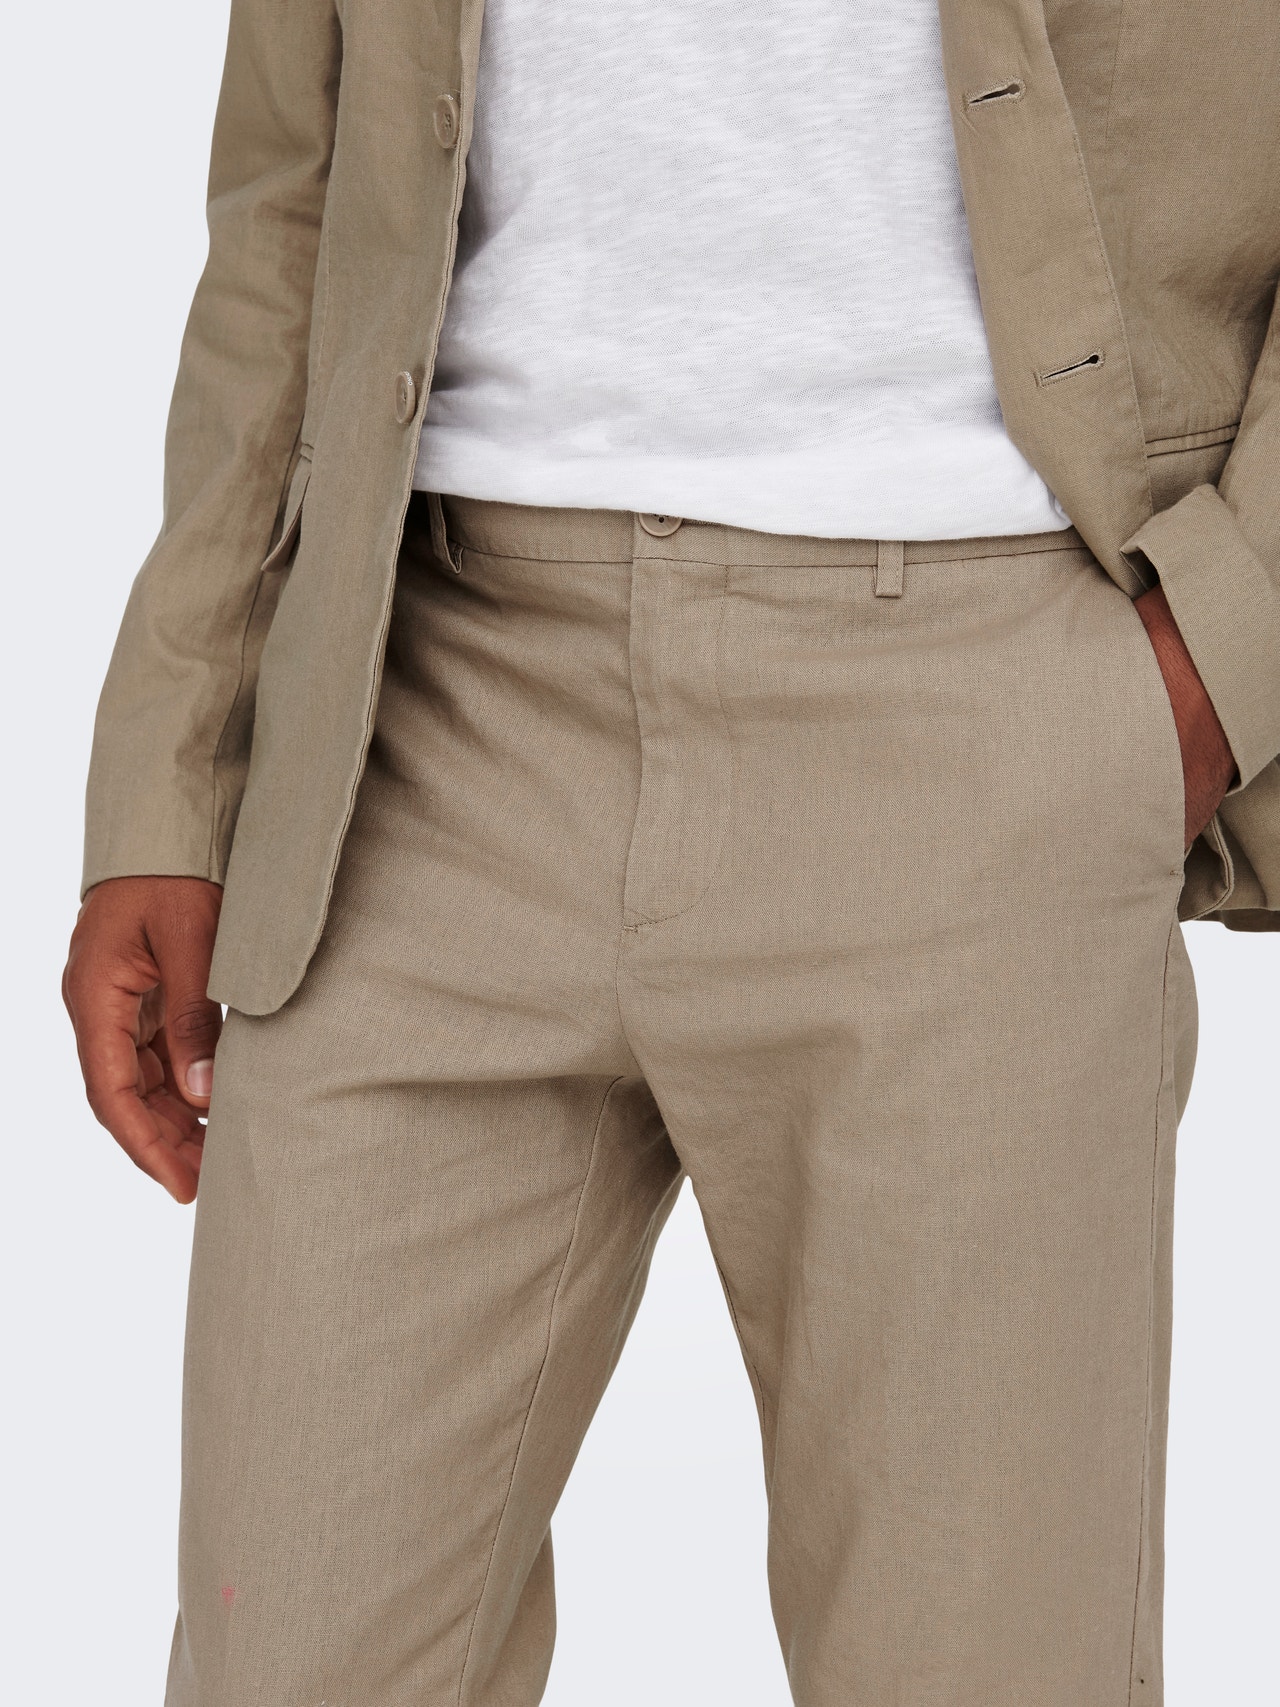 ONLY & SONS Pantalons de tailleur Slim Fit Taille moyenne -Chinchilla - 22026908